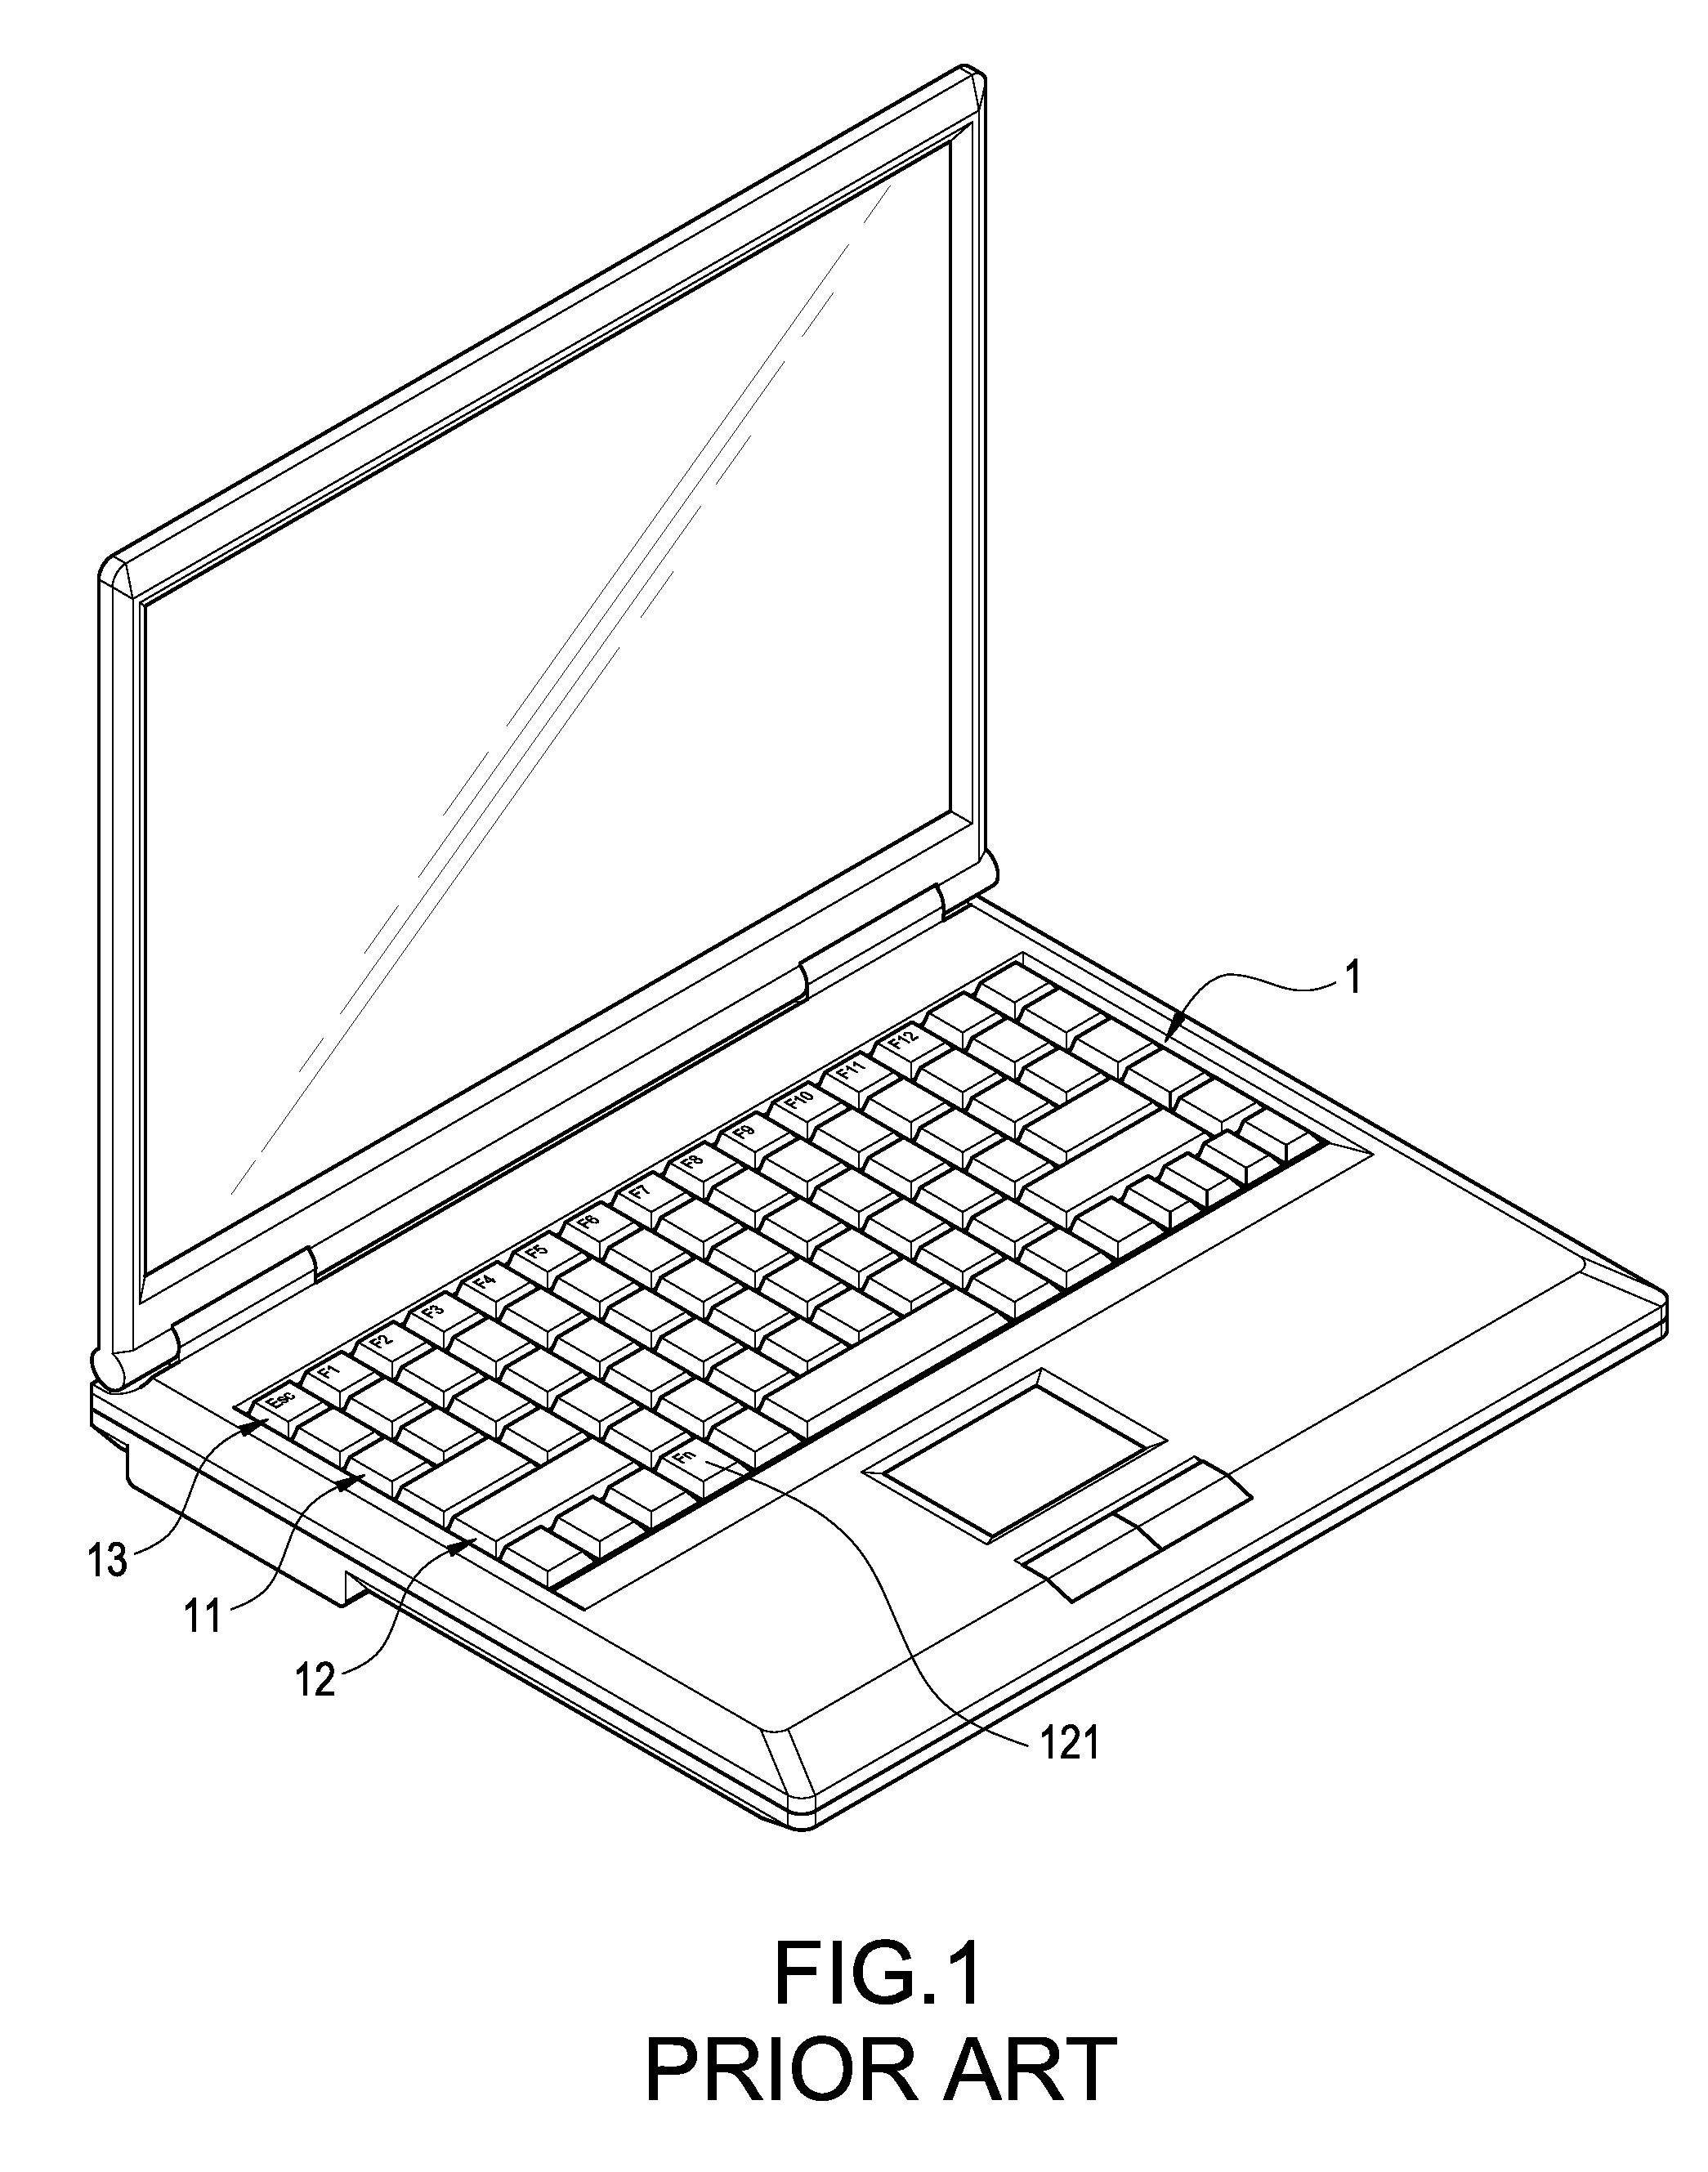 Display method, application program and computer readable medium for computer key function